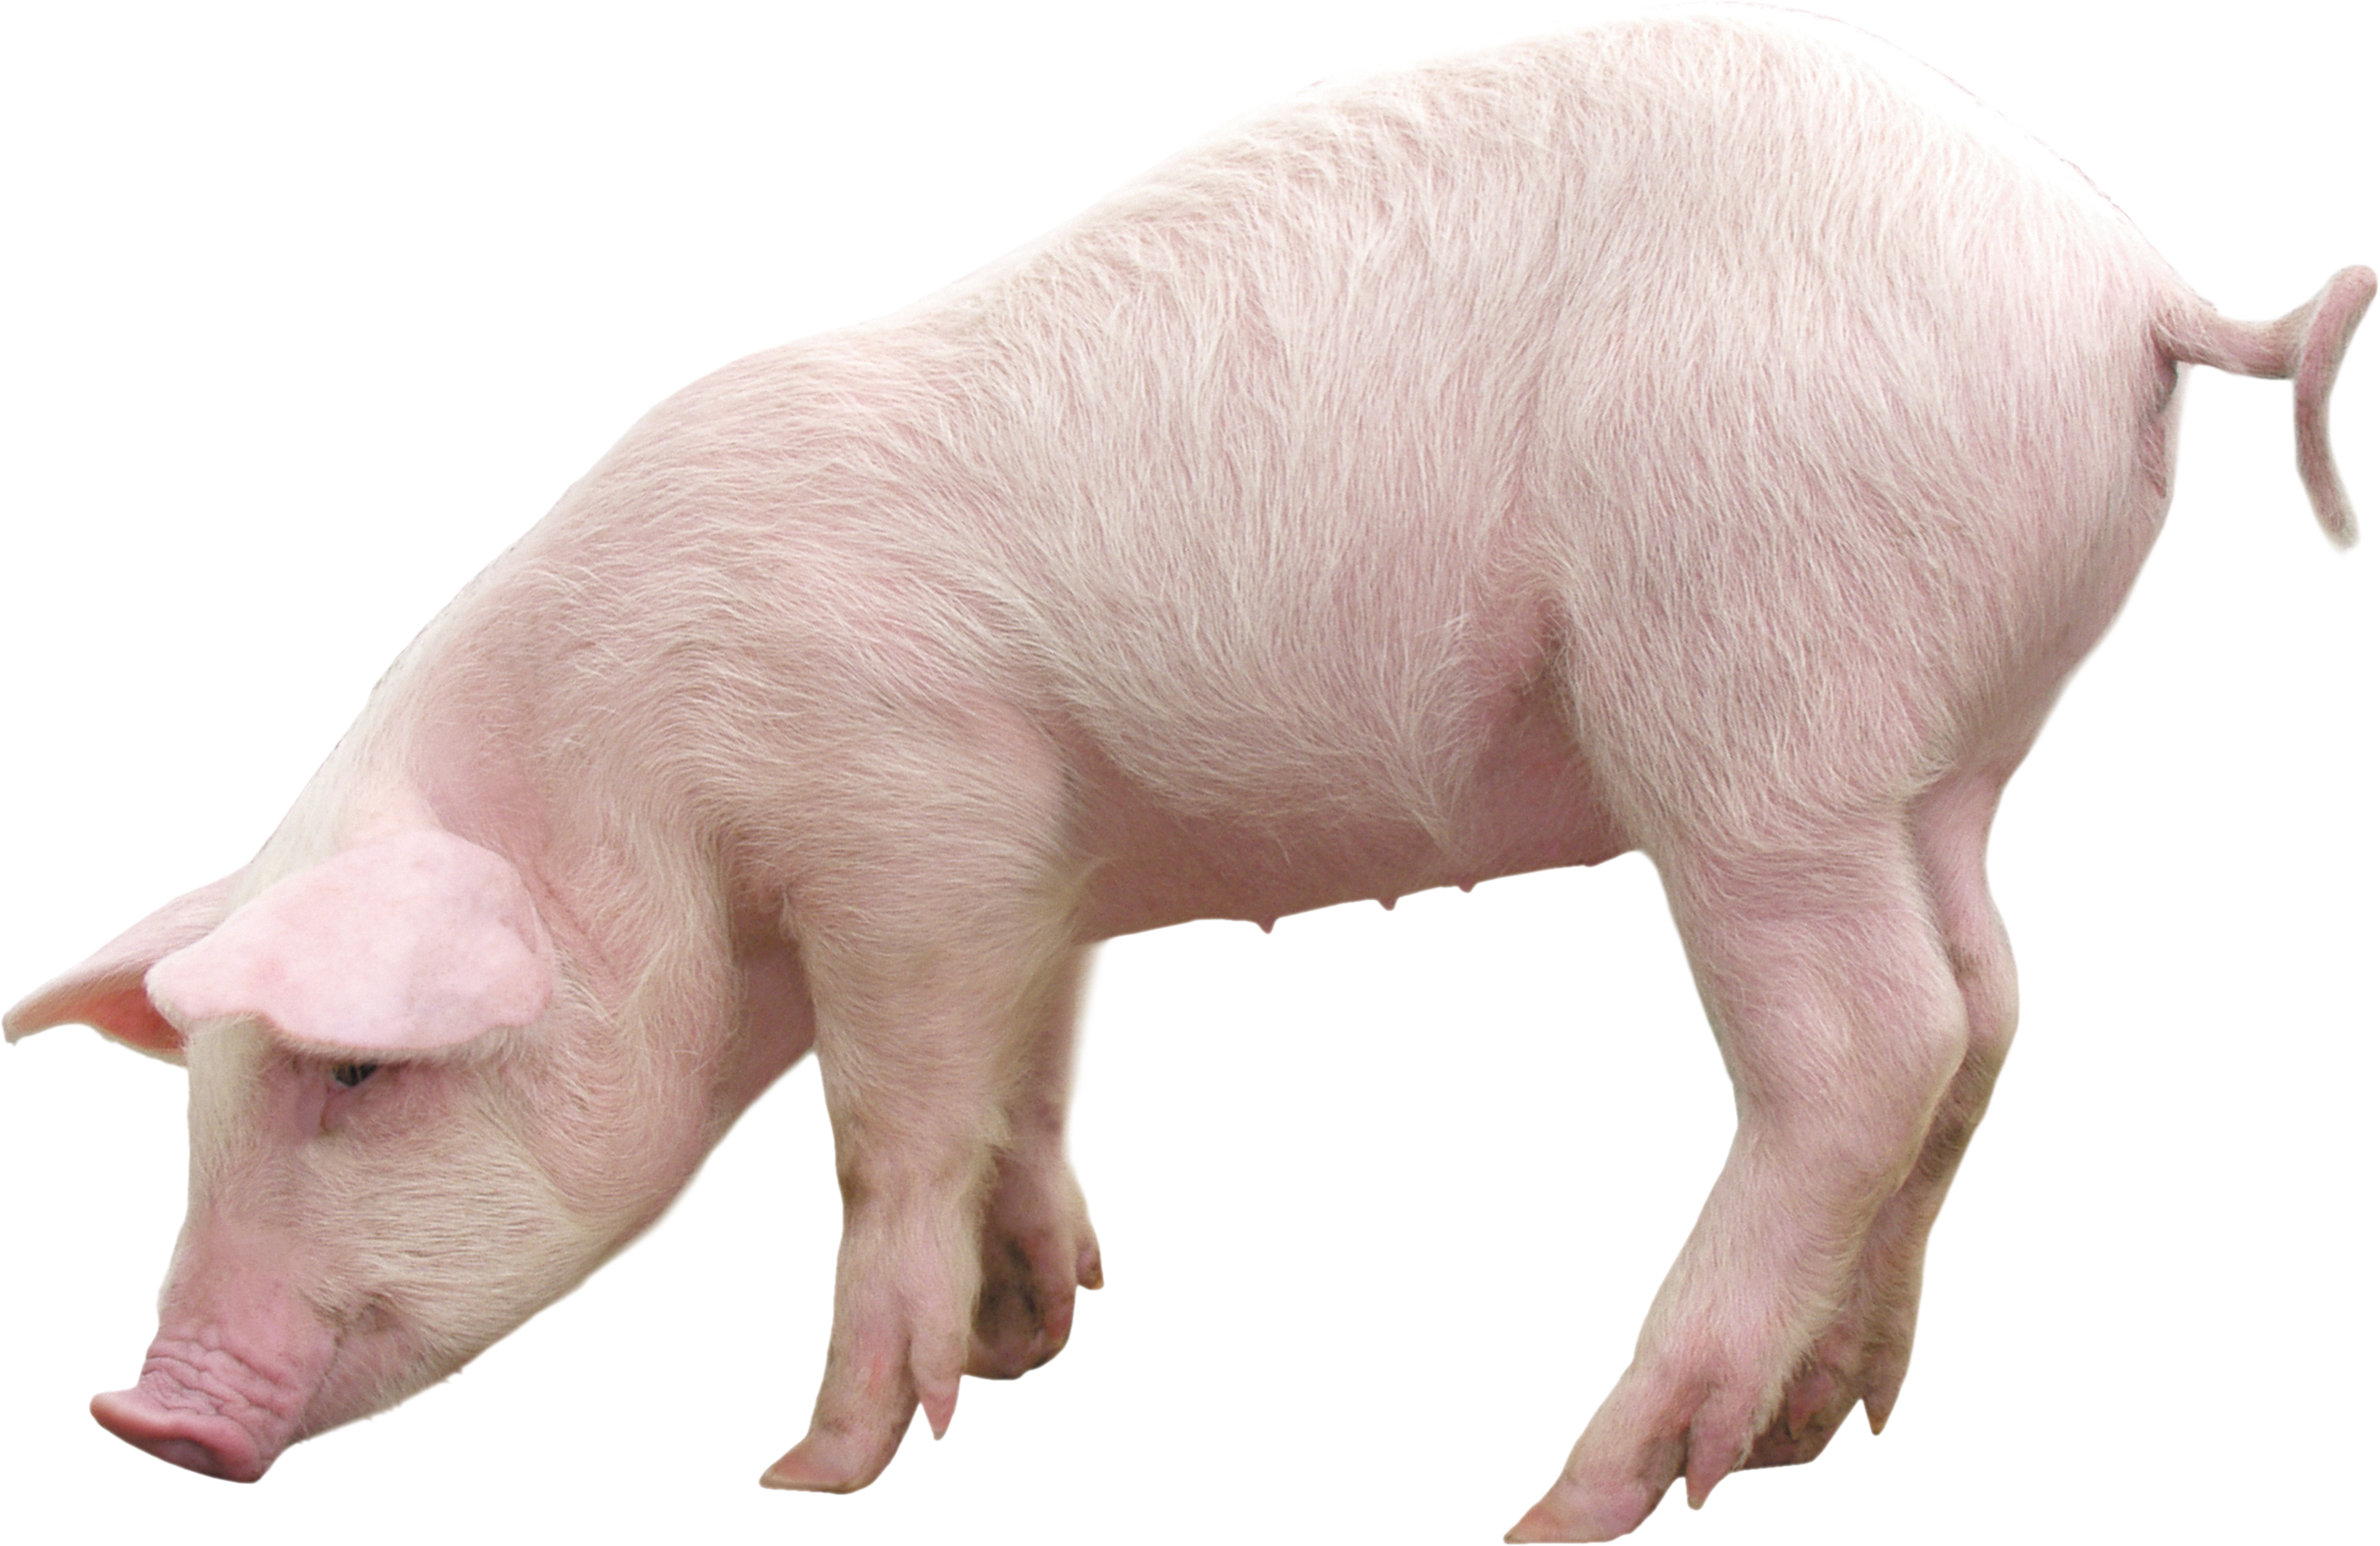 pig.png (600×600)